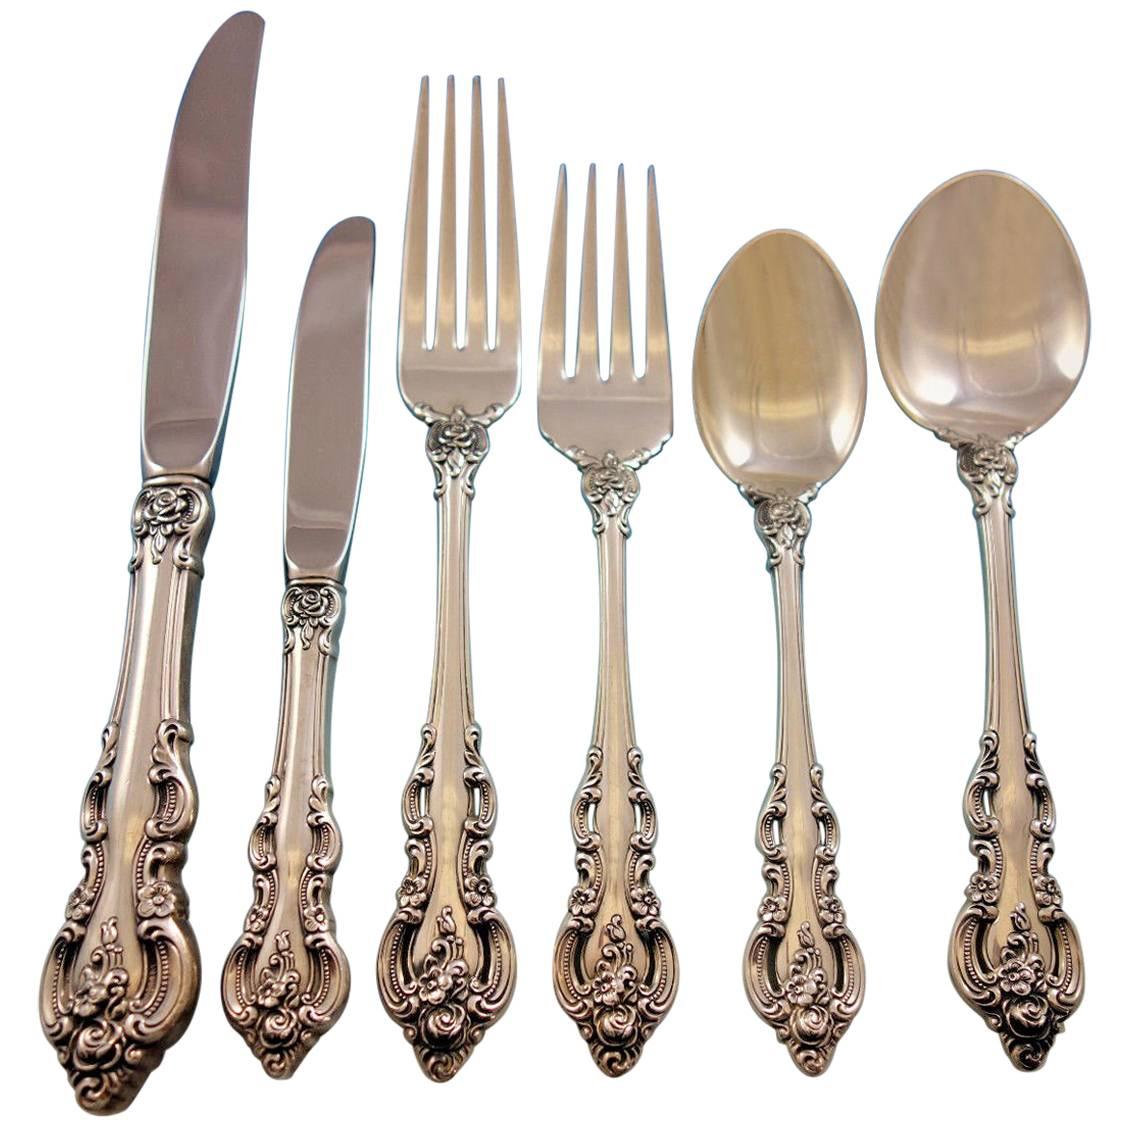 El Grandee by Towle Sterling Silver Flatware Set for 12 Service 79 Pieces For Sale